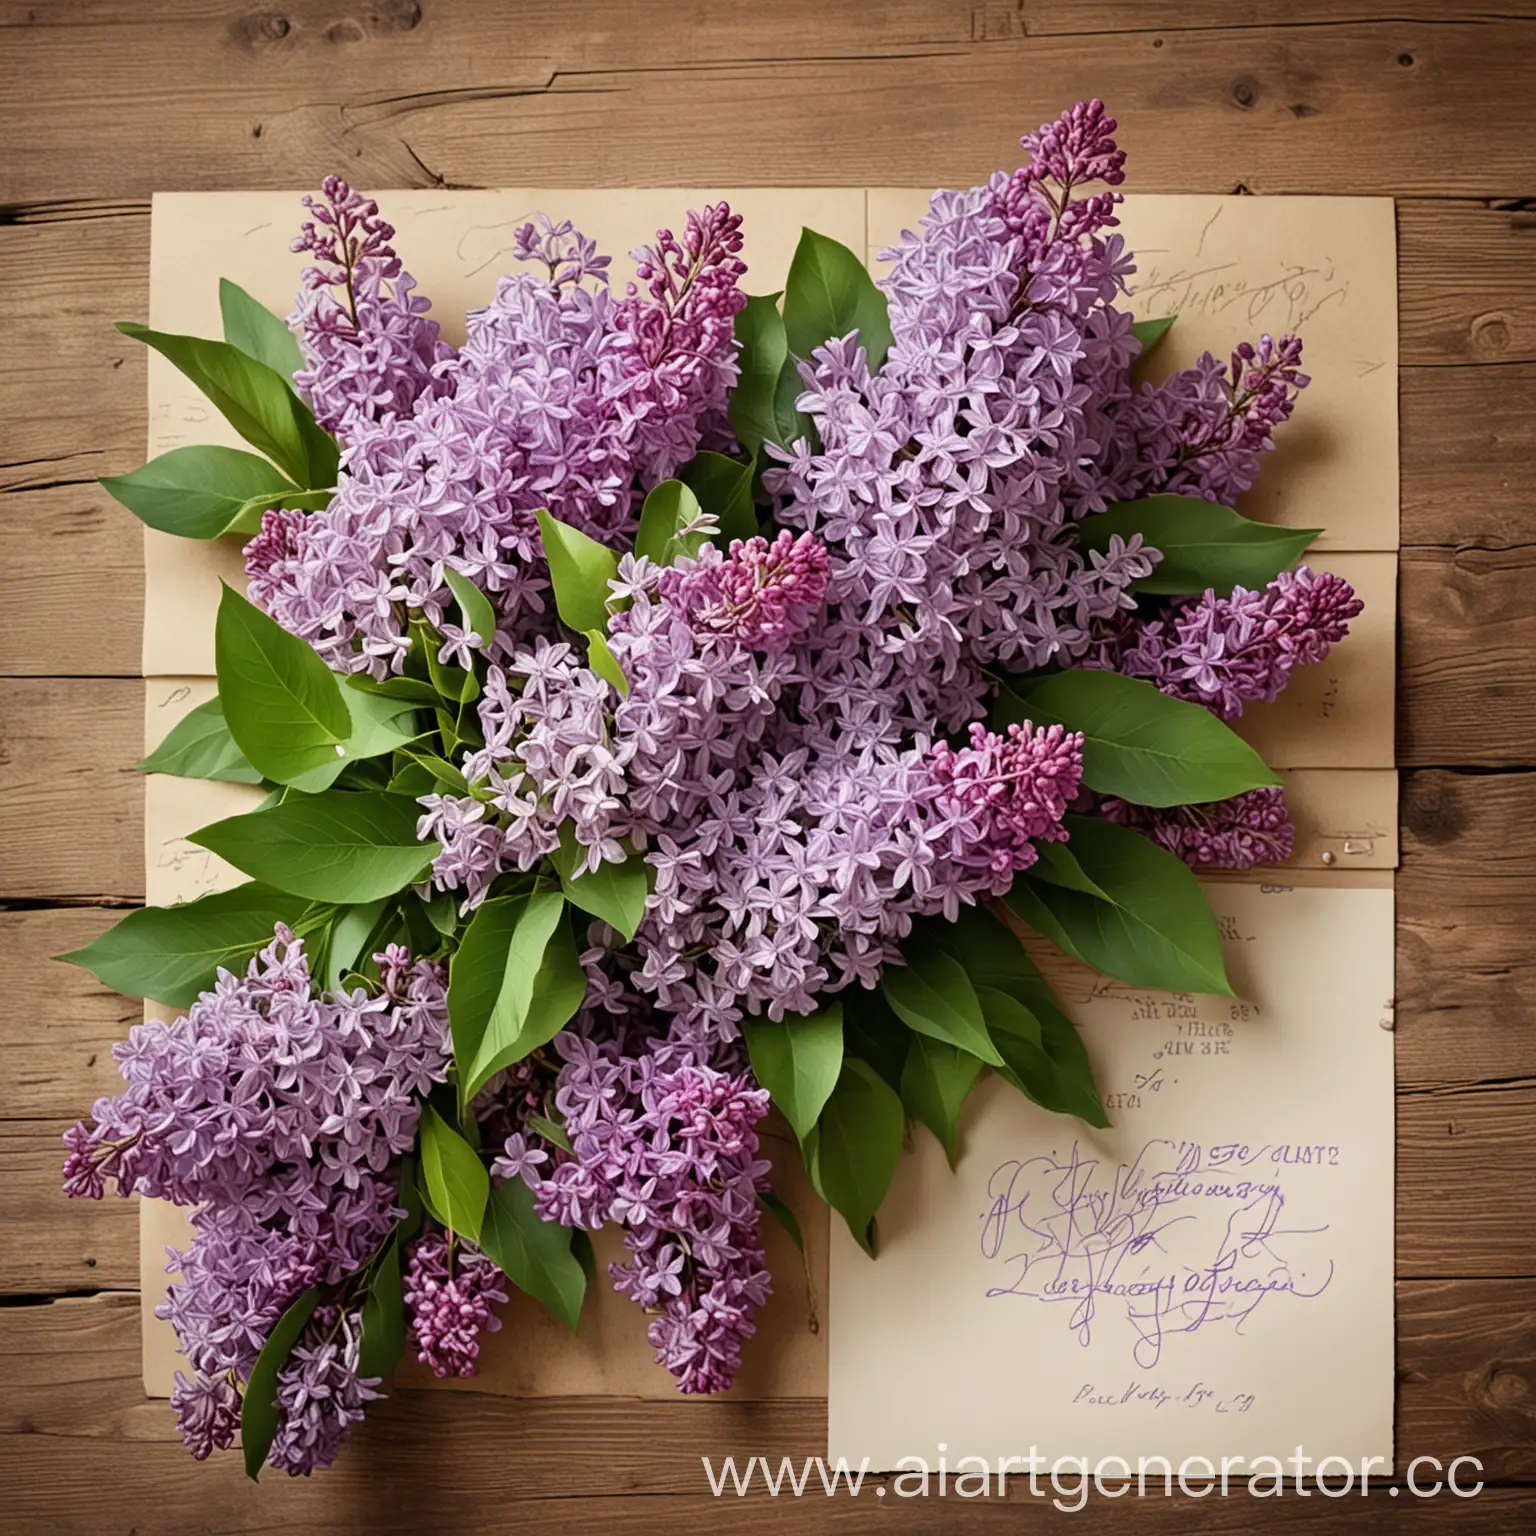 Victory-Day-Postcard-with-Lilacs-Bouquet-and-Congratulatory-Inscription